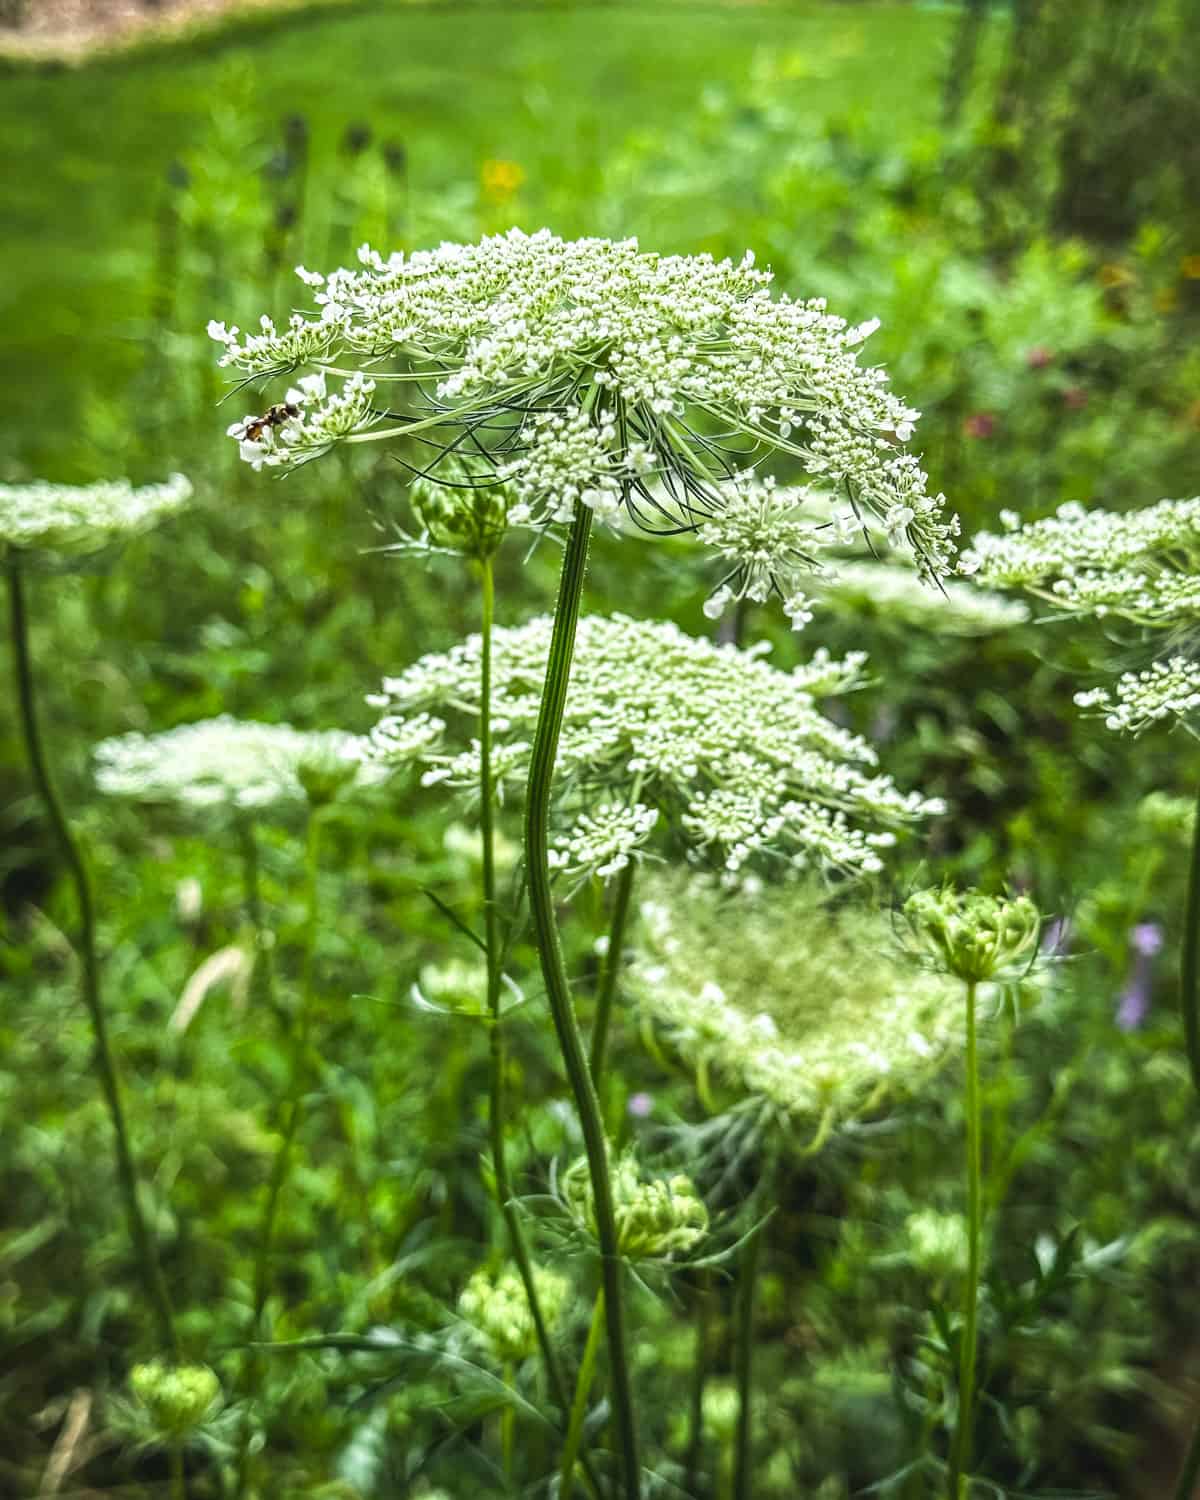 Learn how to identify Queen Anne's Lace, then play with it in the kitchen.